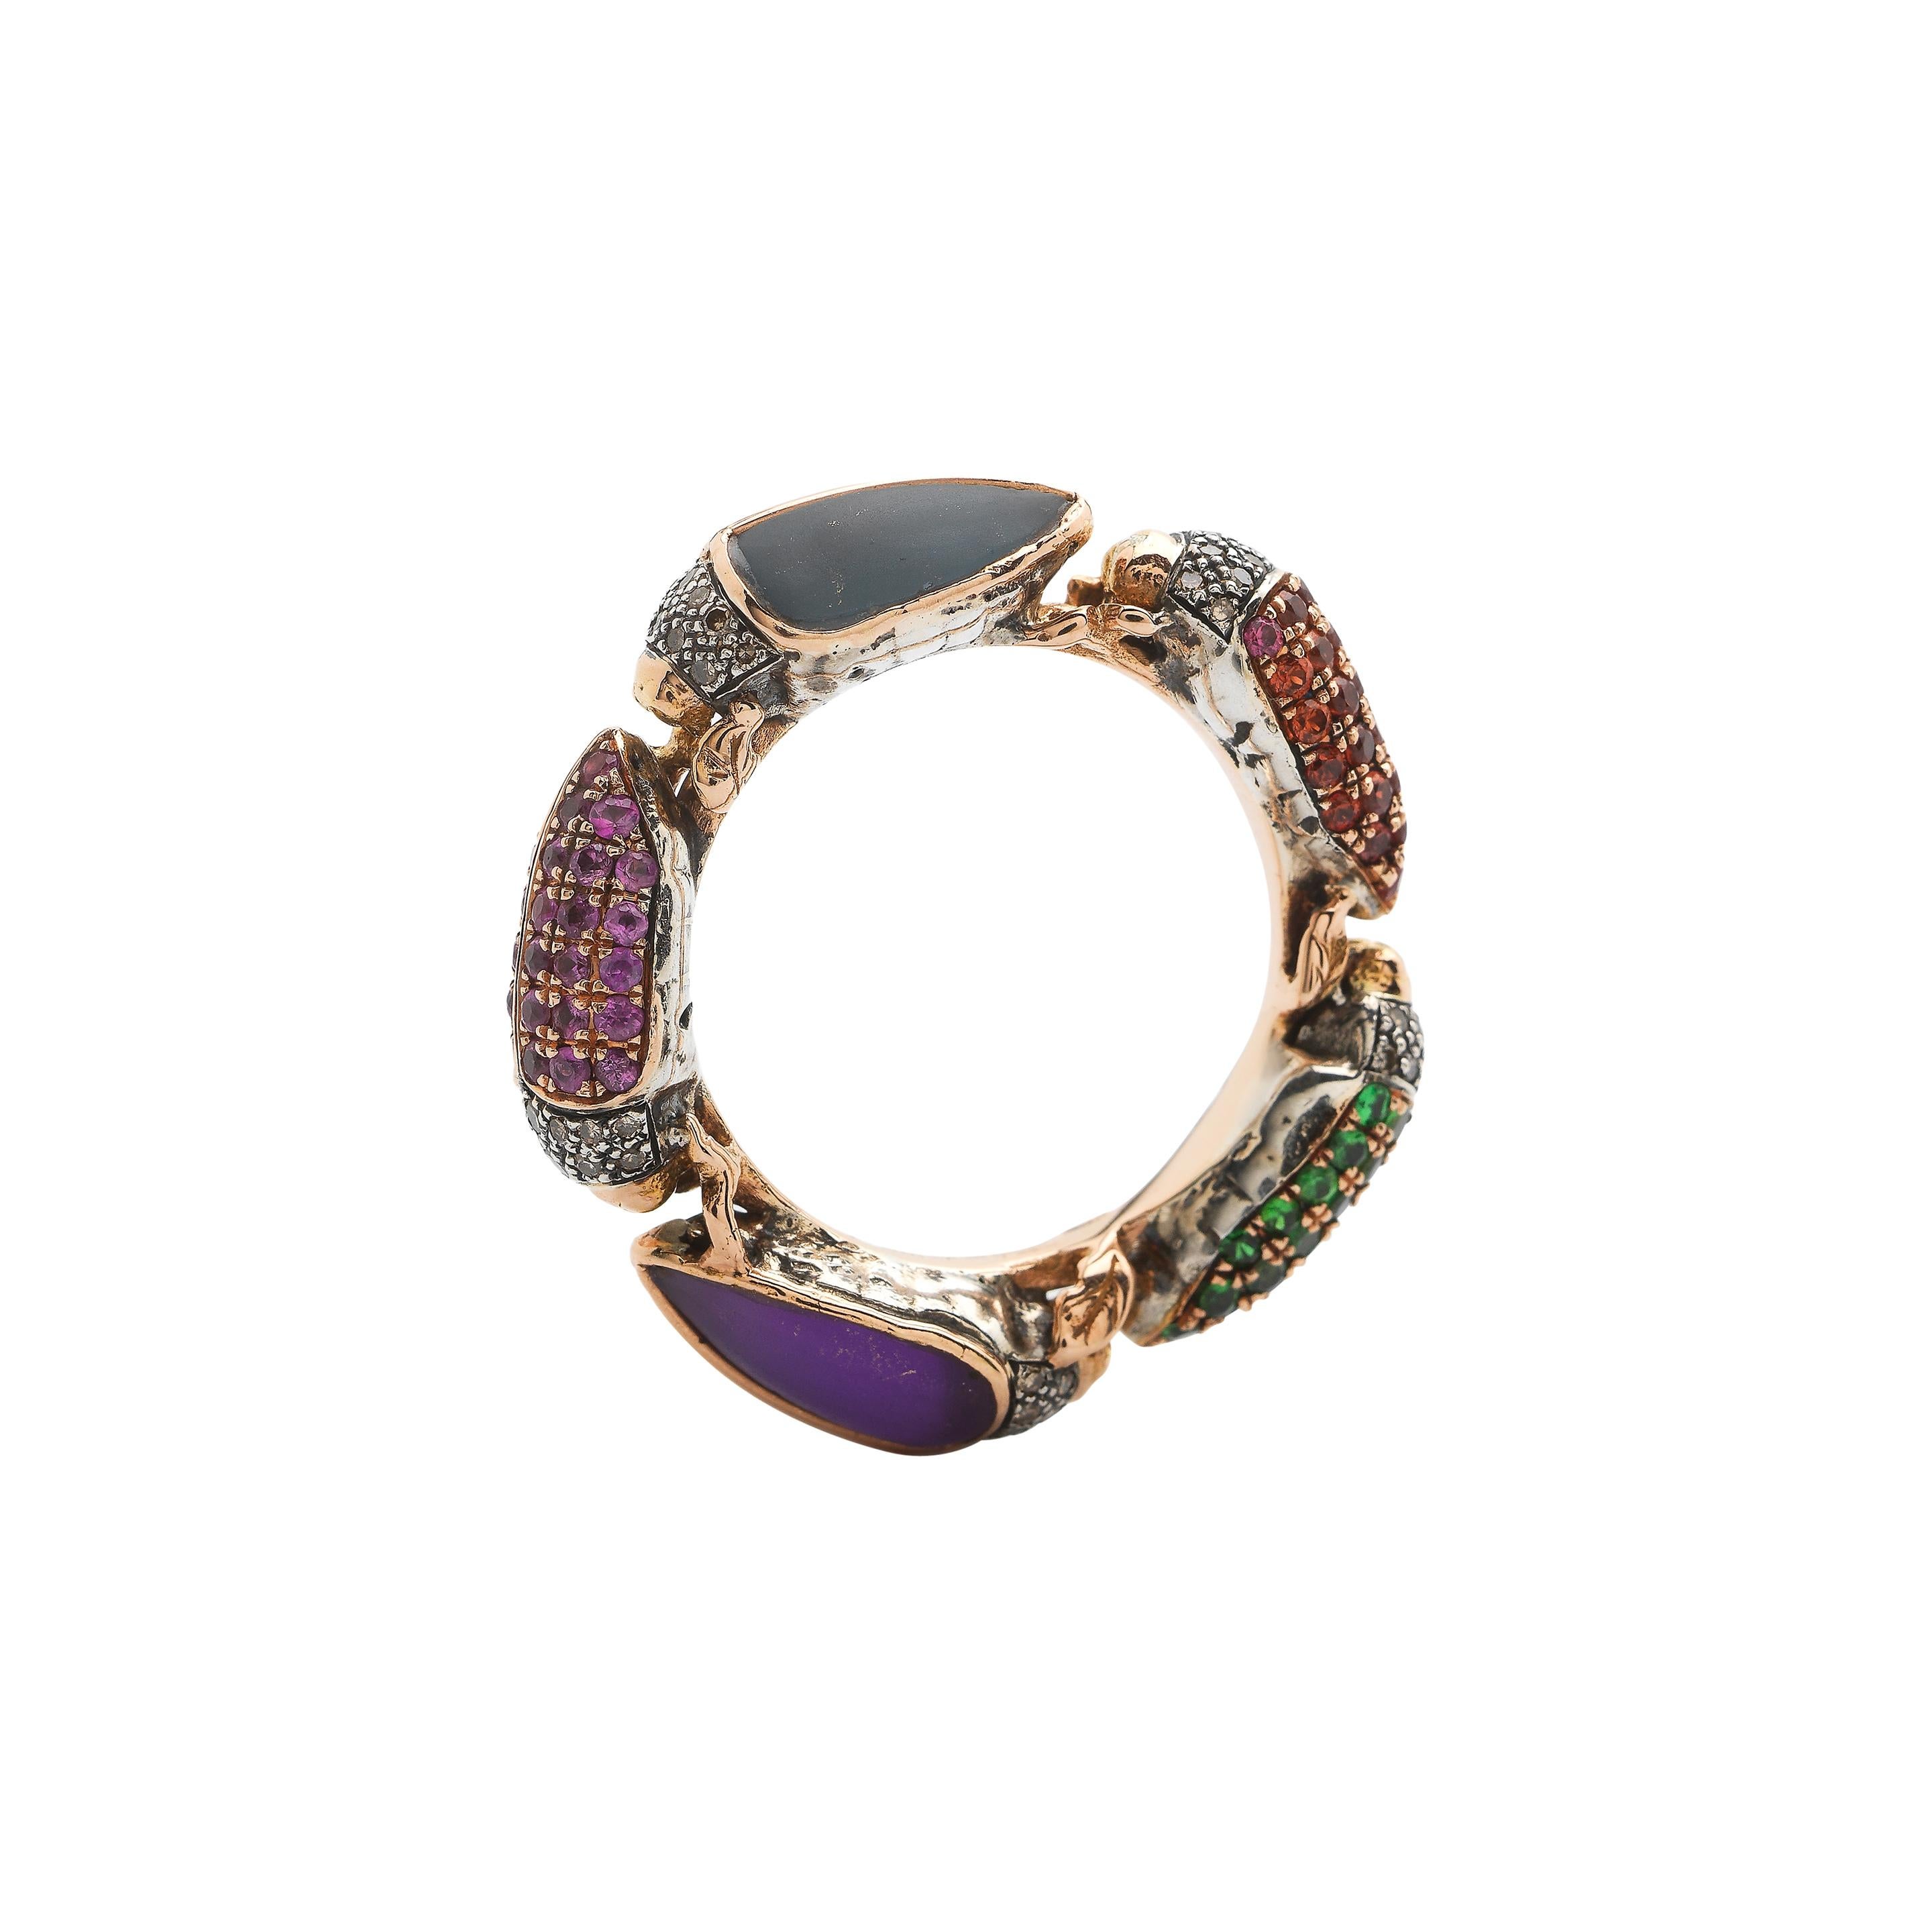 Five beautiful scarab beetles joined together make up the Scarab Eternity Ring, designed in 18k rose gold and sterling silver. The beetles in this ring are set with brown diamonds, amethyst, multi-coloured sapphires, blue topaz and tsavorites, but